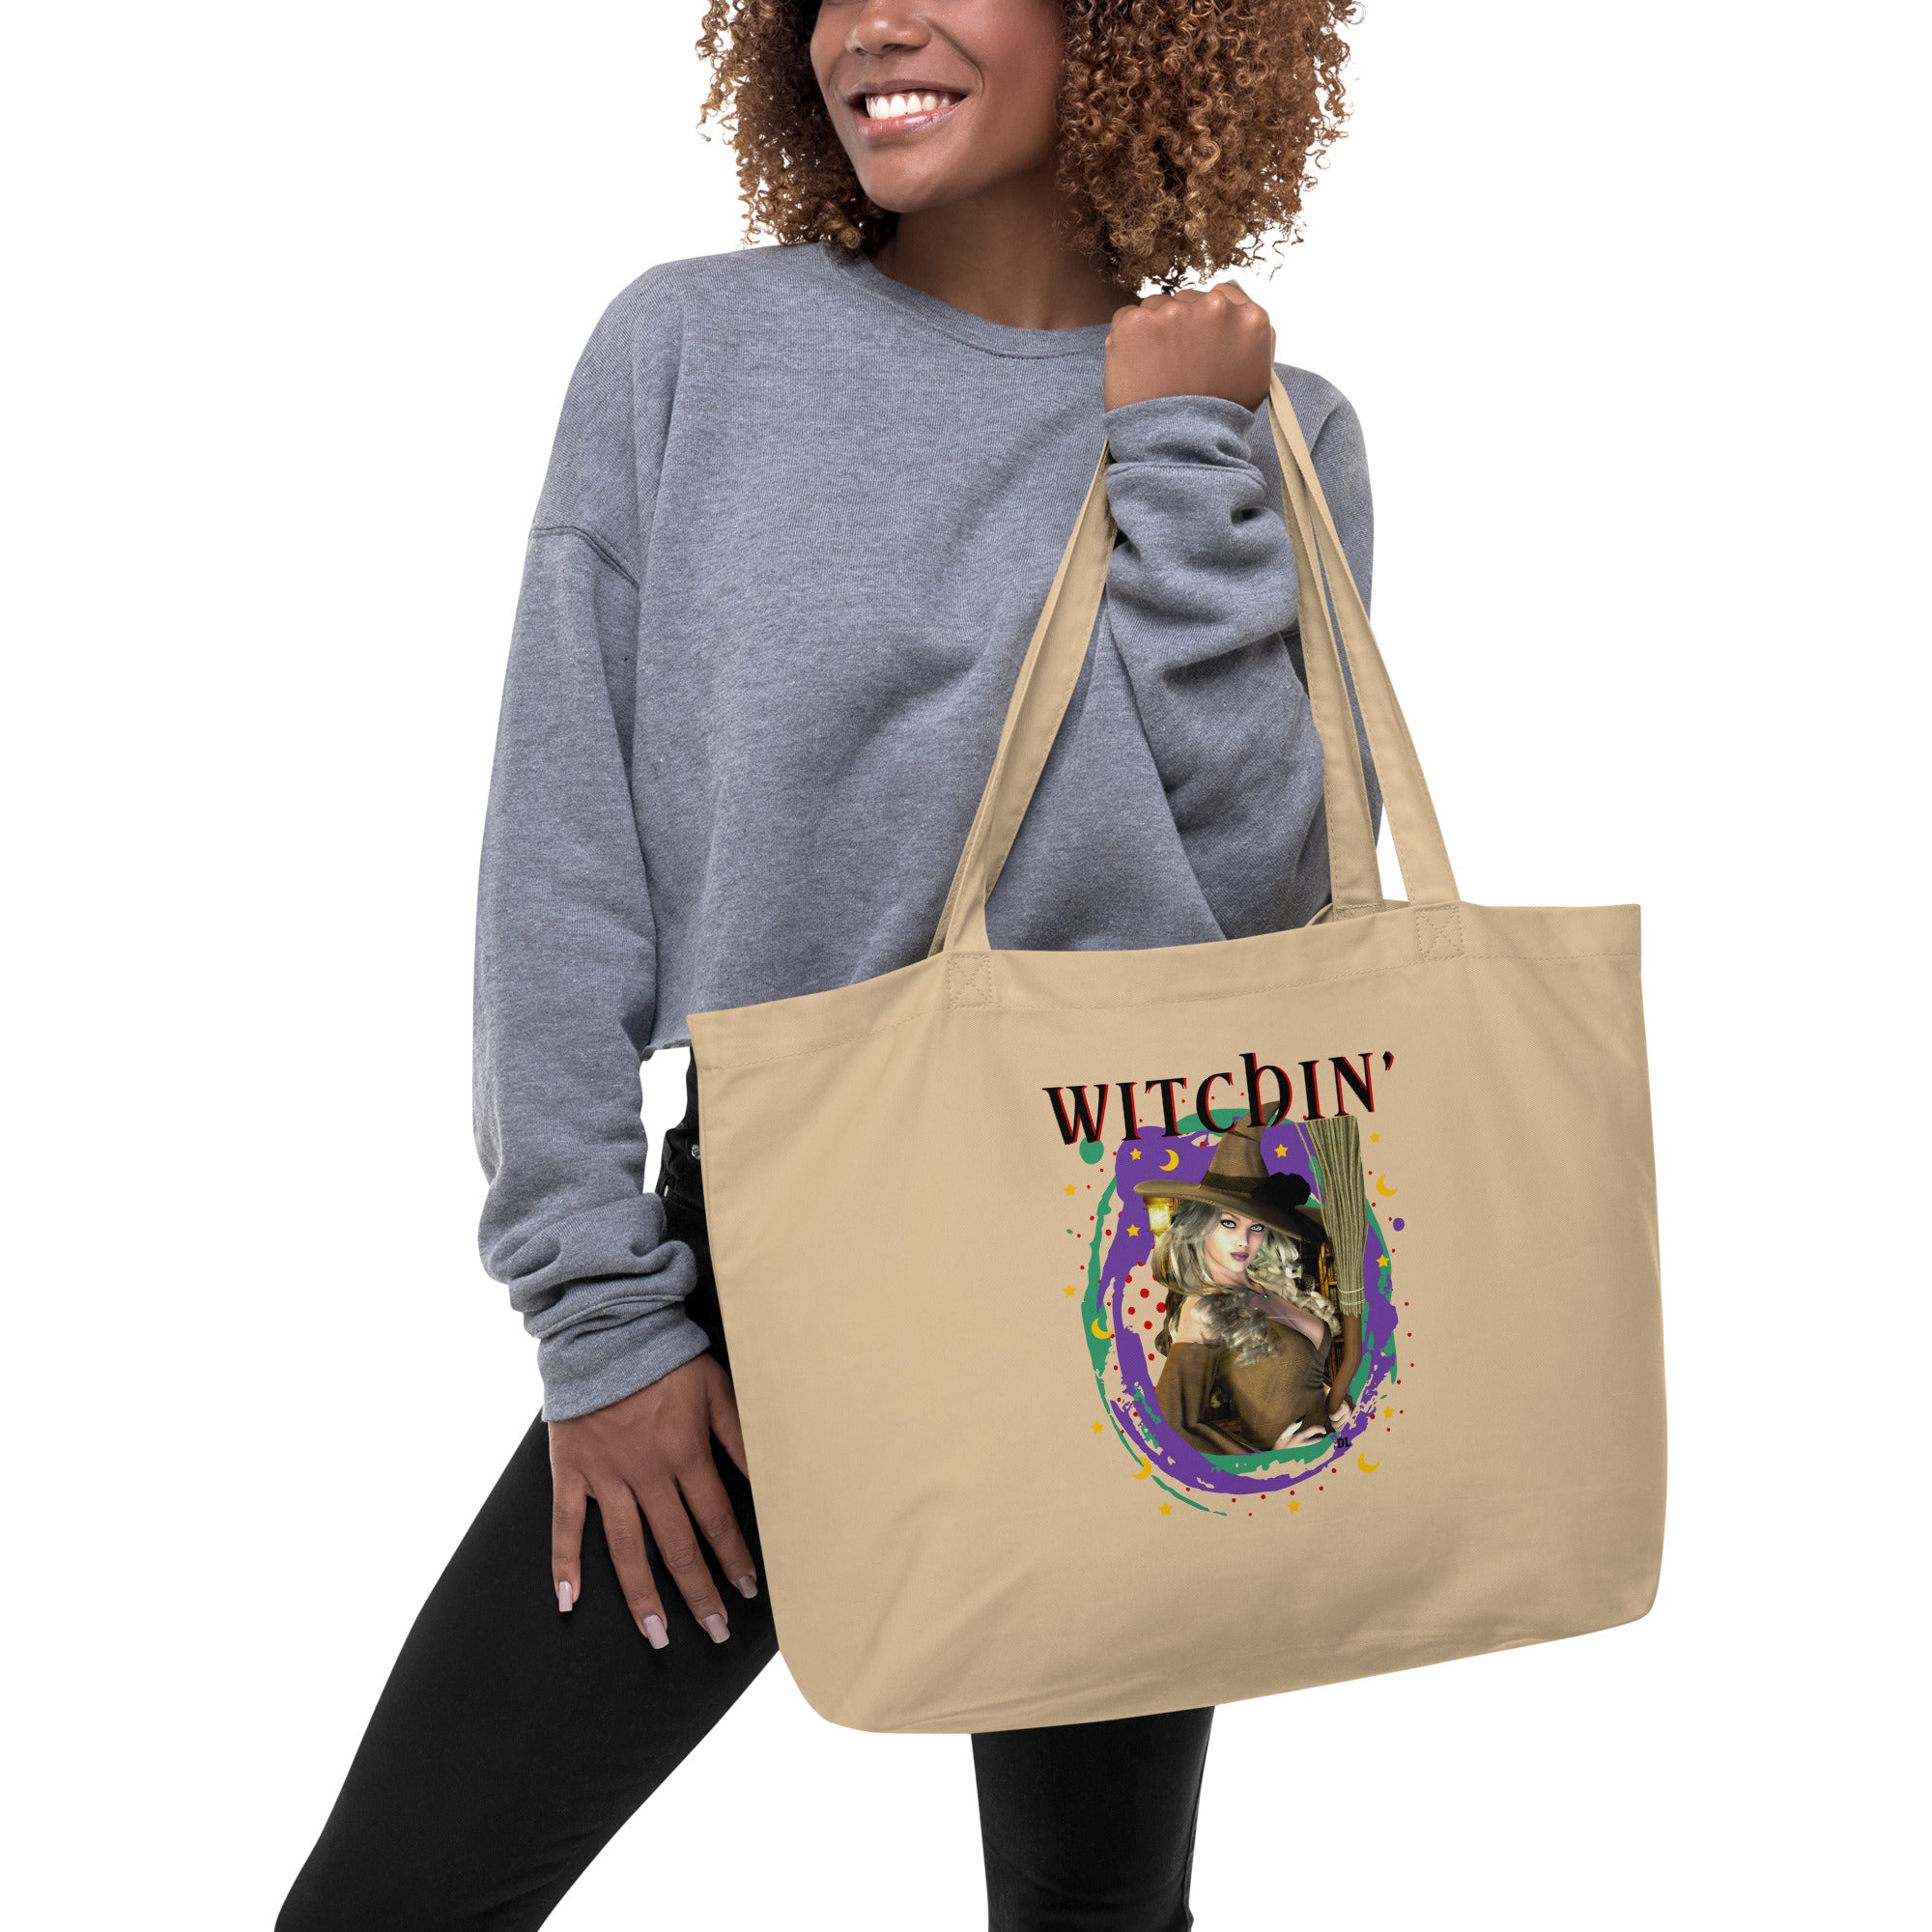 Witchin' Witch Art Large Organic  Eco Friendly Tote Bag